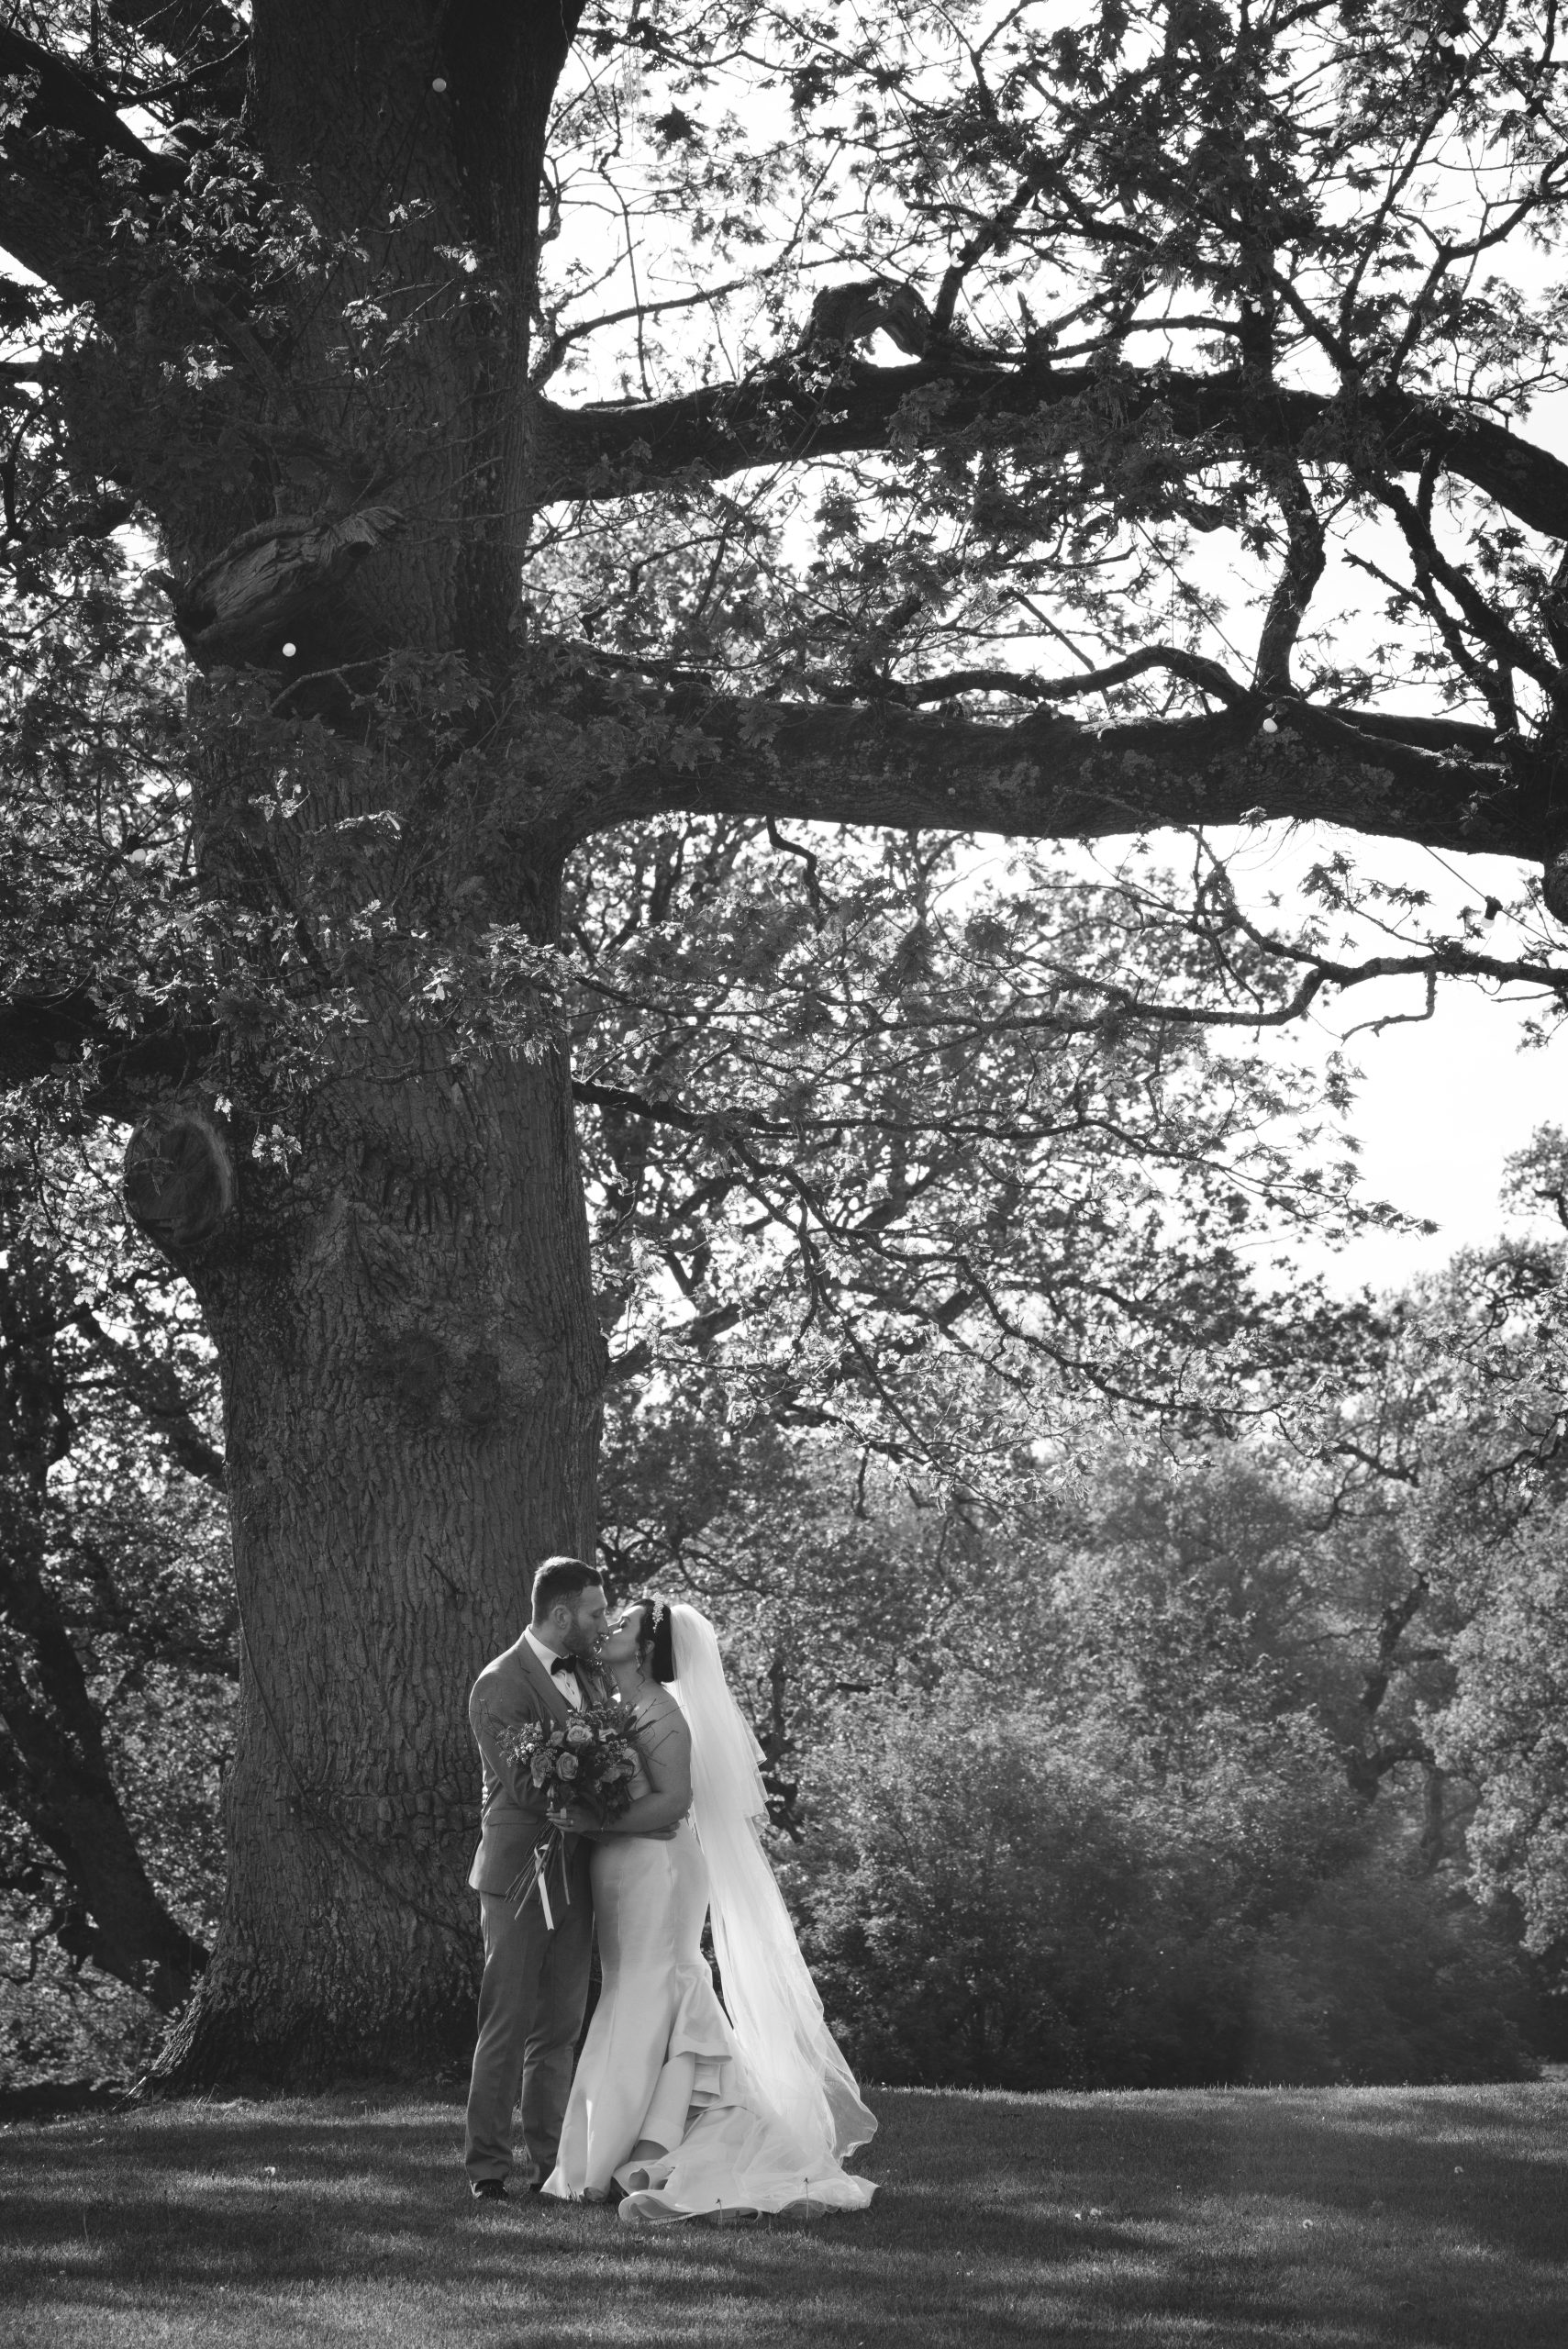 Black and white shot of a couple under a big tree